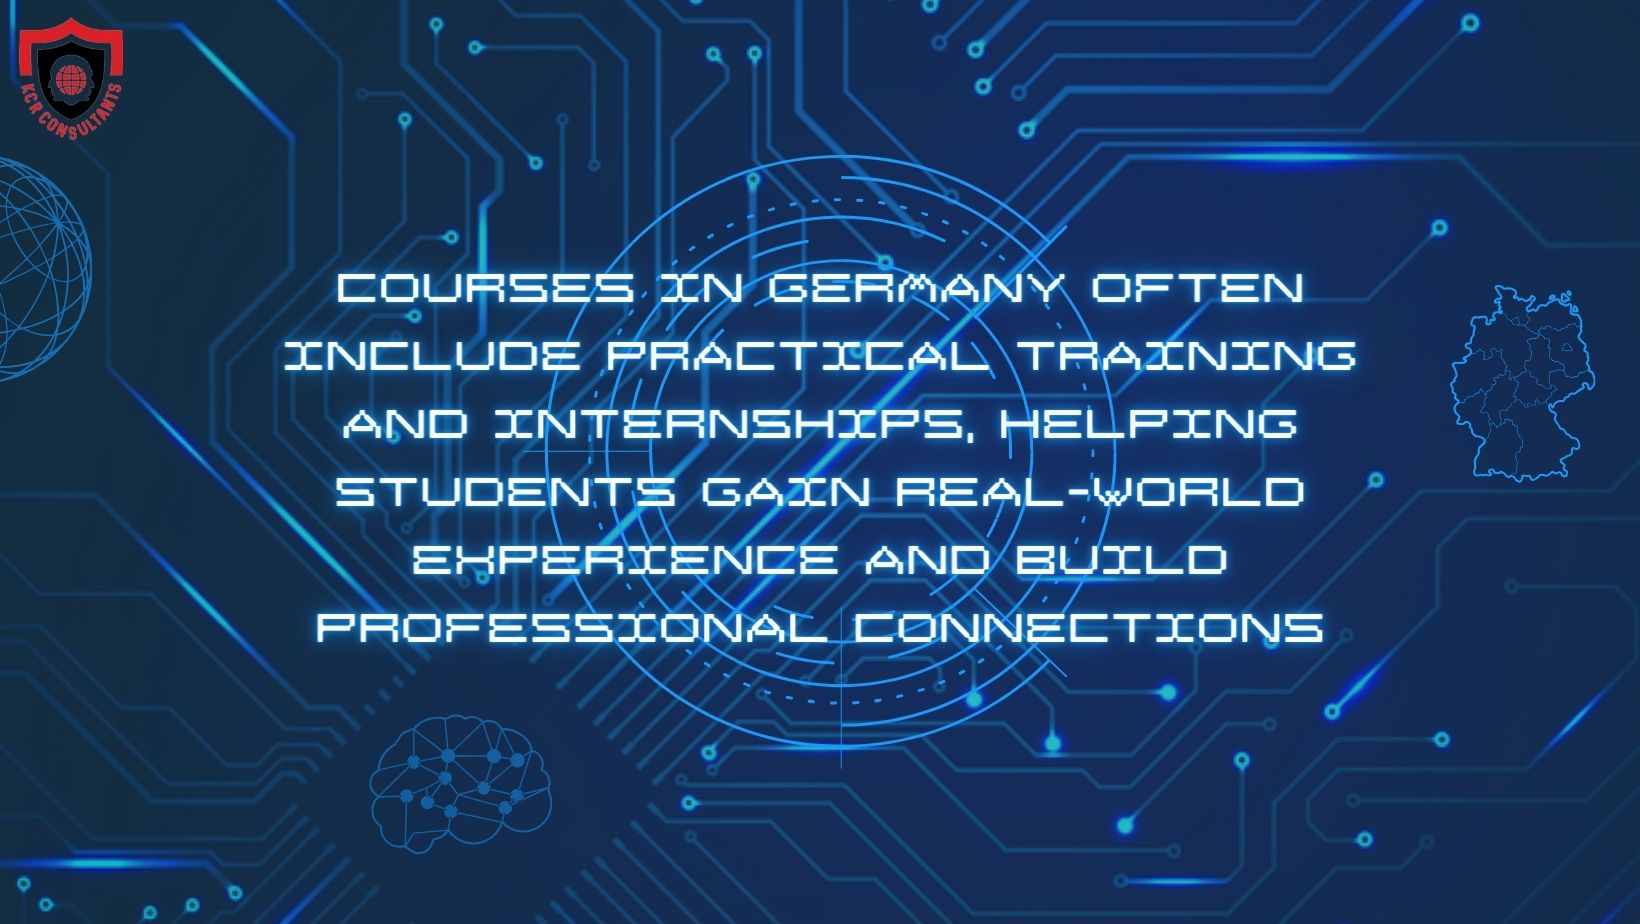 Studying IT in Germany - KCR CONSULTANTS - benefits of IT courses in Germany